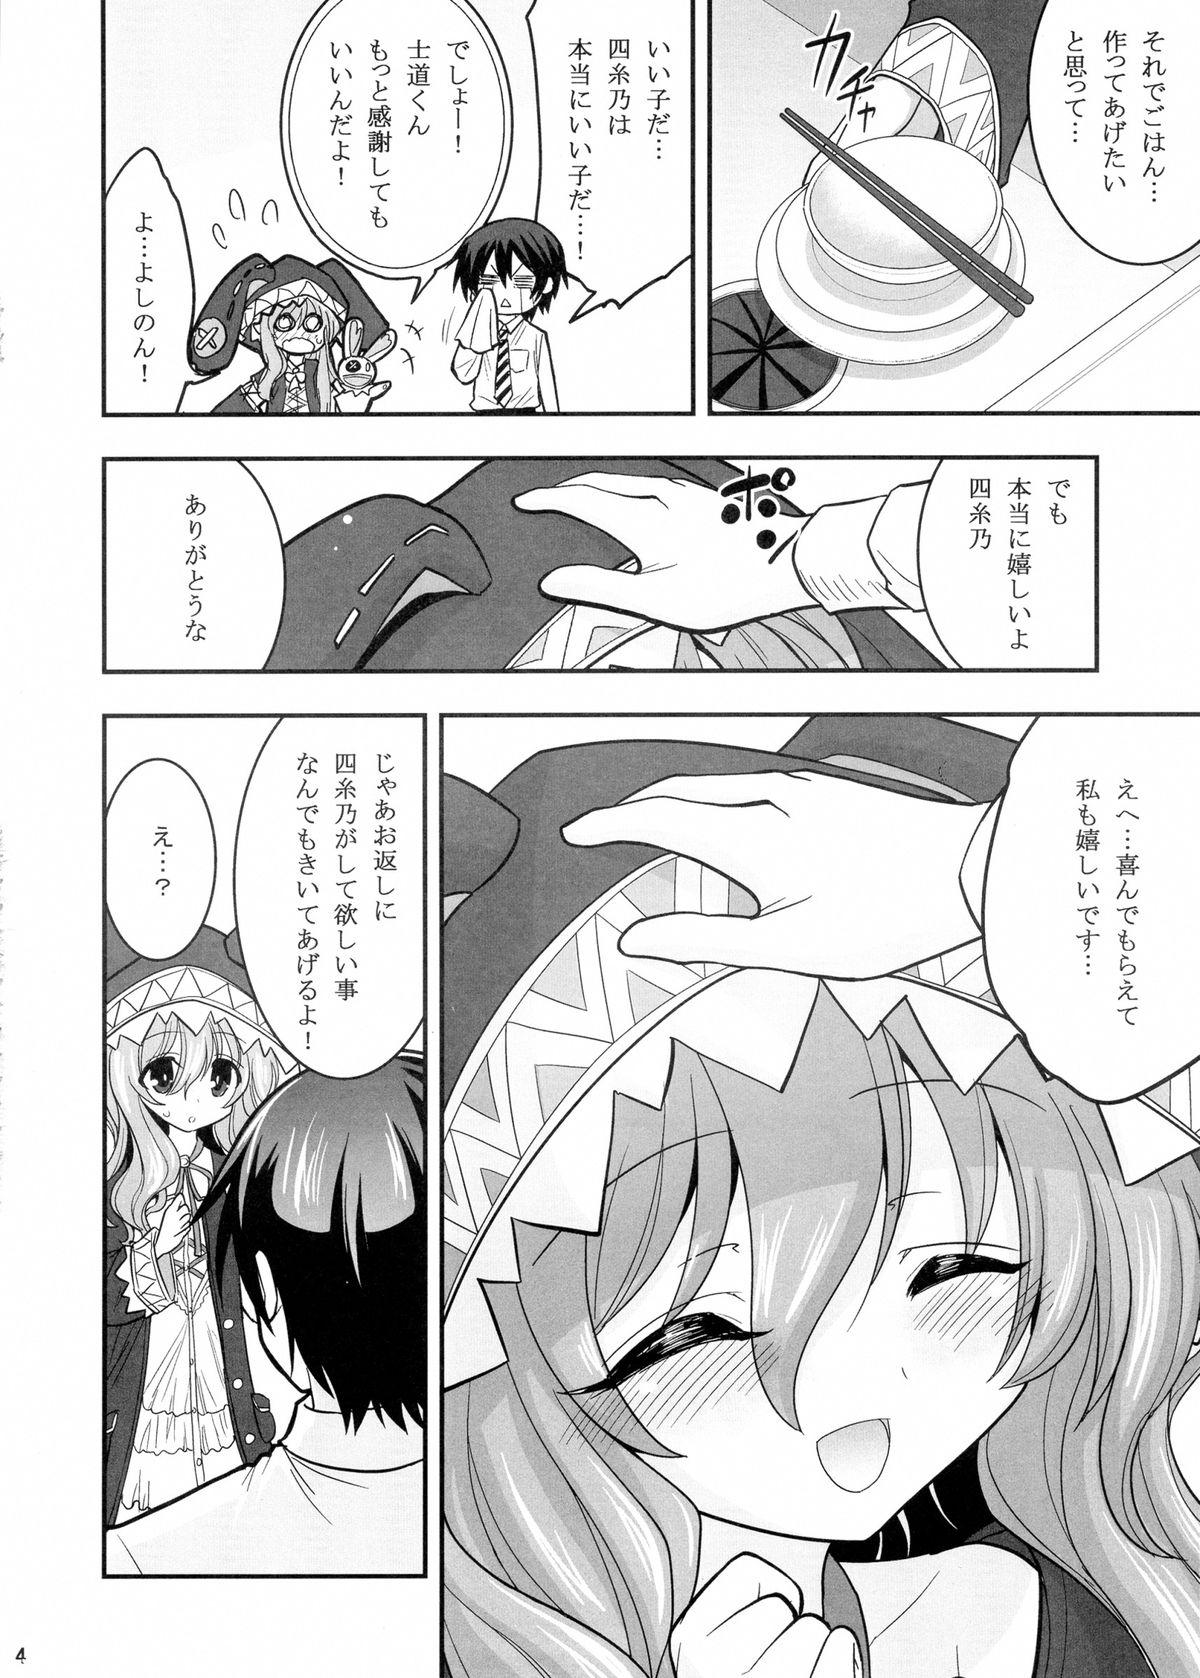 Groupsex Yoshino Date After - Date a live Cutie - Page 4